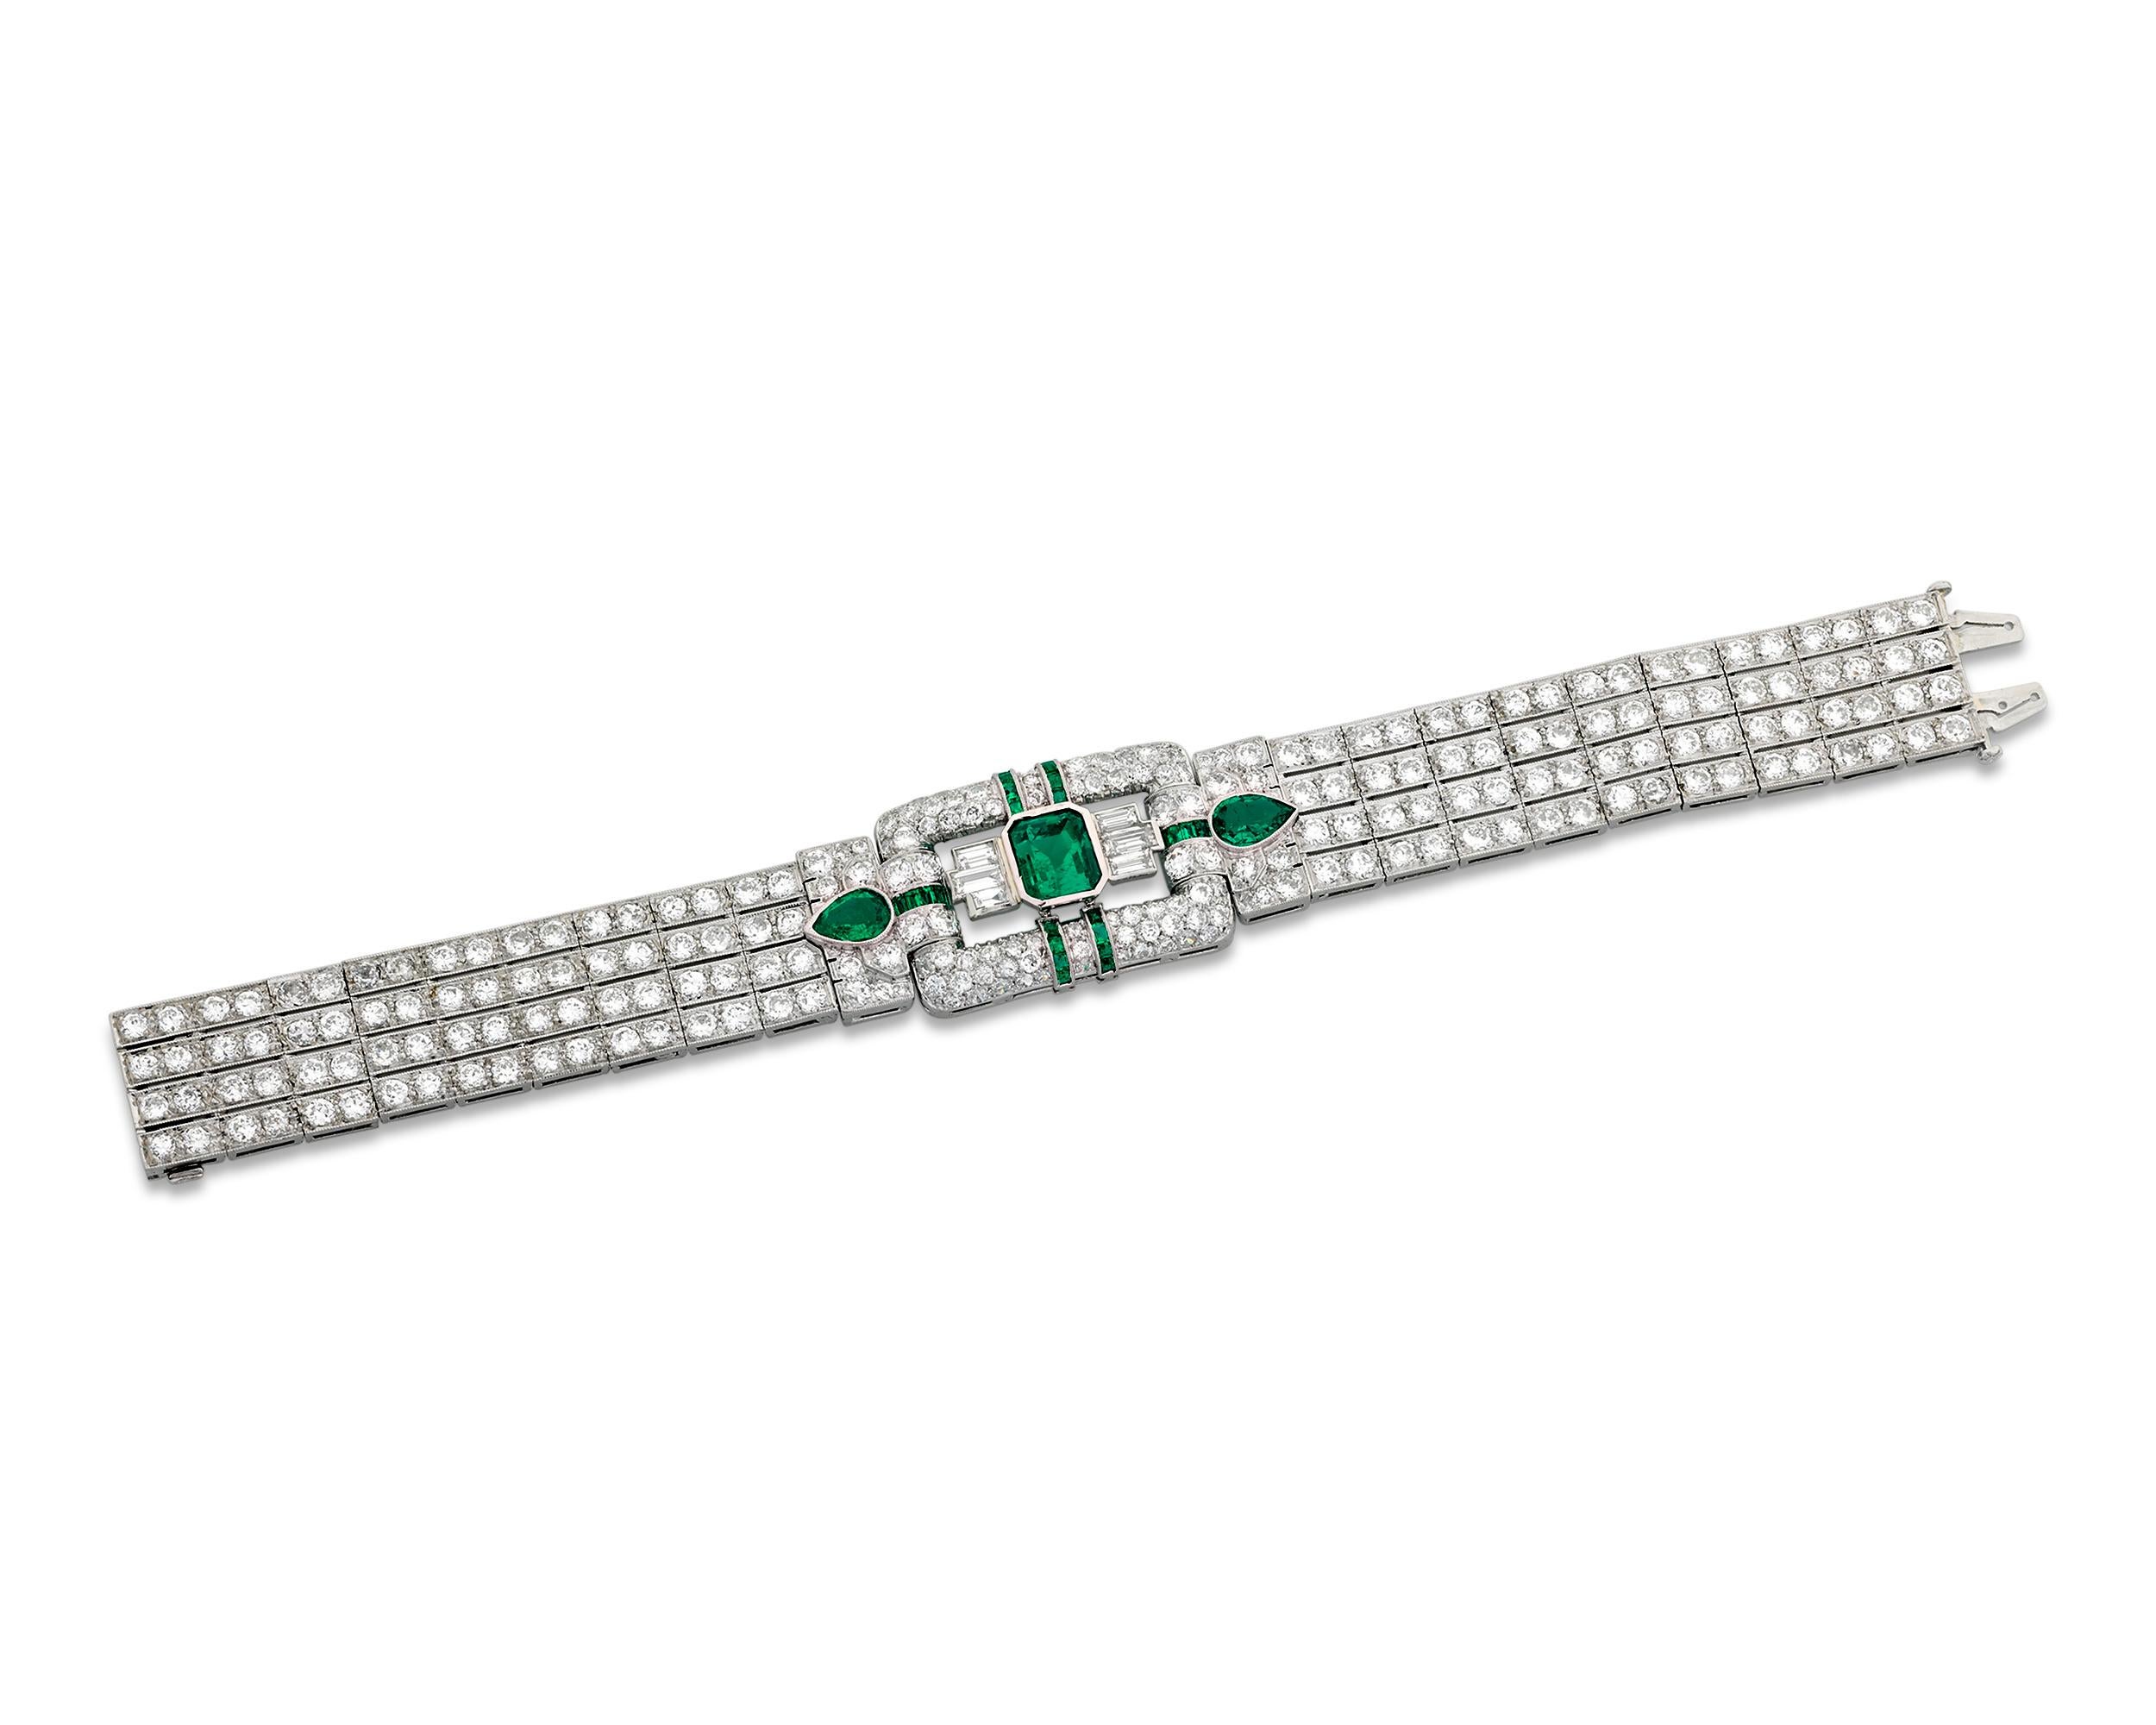 This outstanding Art Deco-period bracelet is the epitome of modern glamour. A remarkable 16.90 total carats of diamonds and emeralds encase the streamlined design, including an impressive 2.46-carat emerald at the center of the buckle-shaped